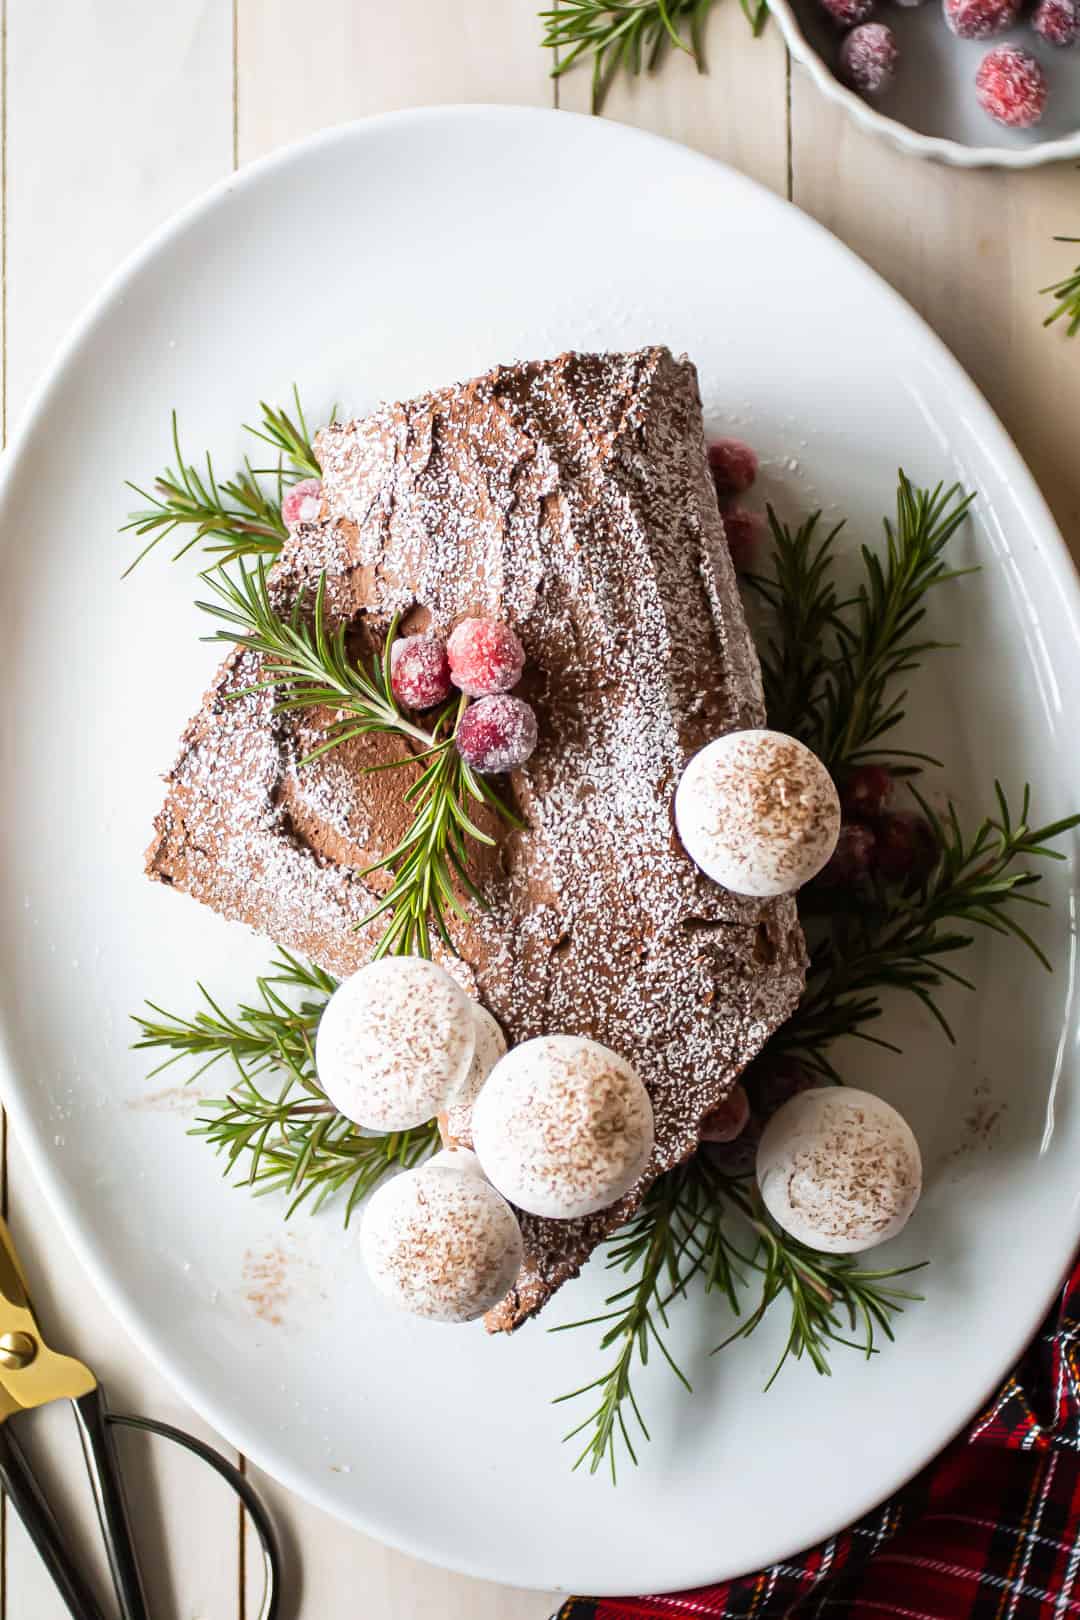 Overhead image of a chocolate yule log buche de noel cake garnished with powdered sugar, meringue mushrooms, greens, and sugared cranberries.